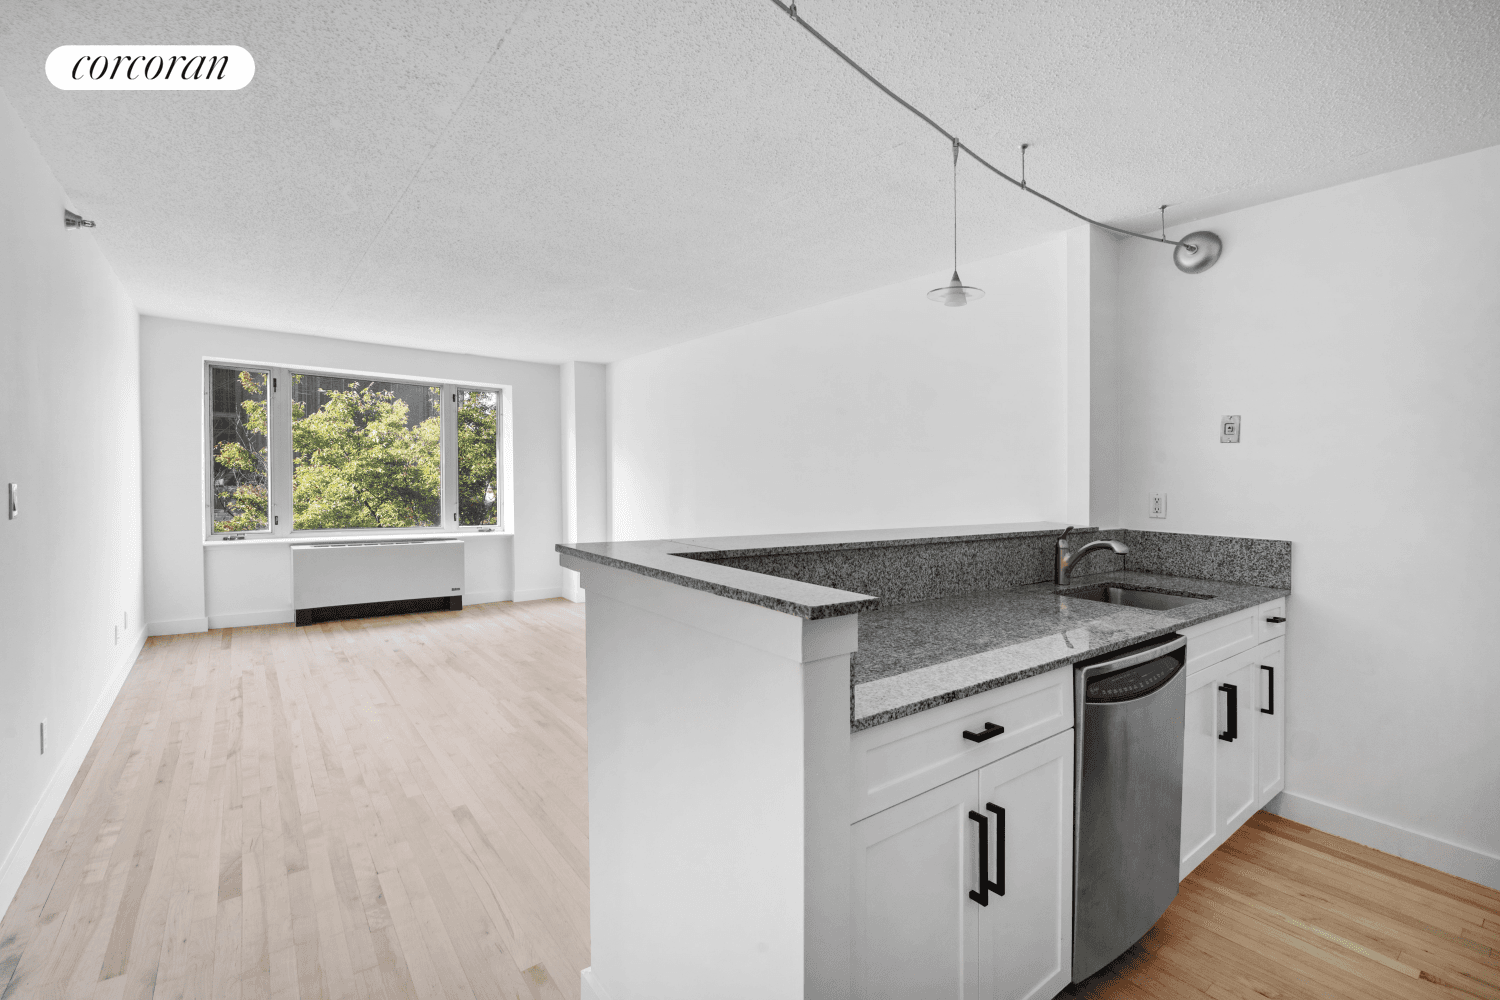 Perfect size, functional space and right in the middle of Brooklyn's best neighborhoods !